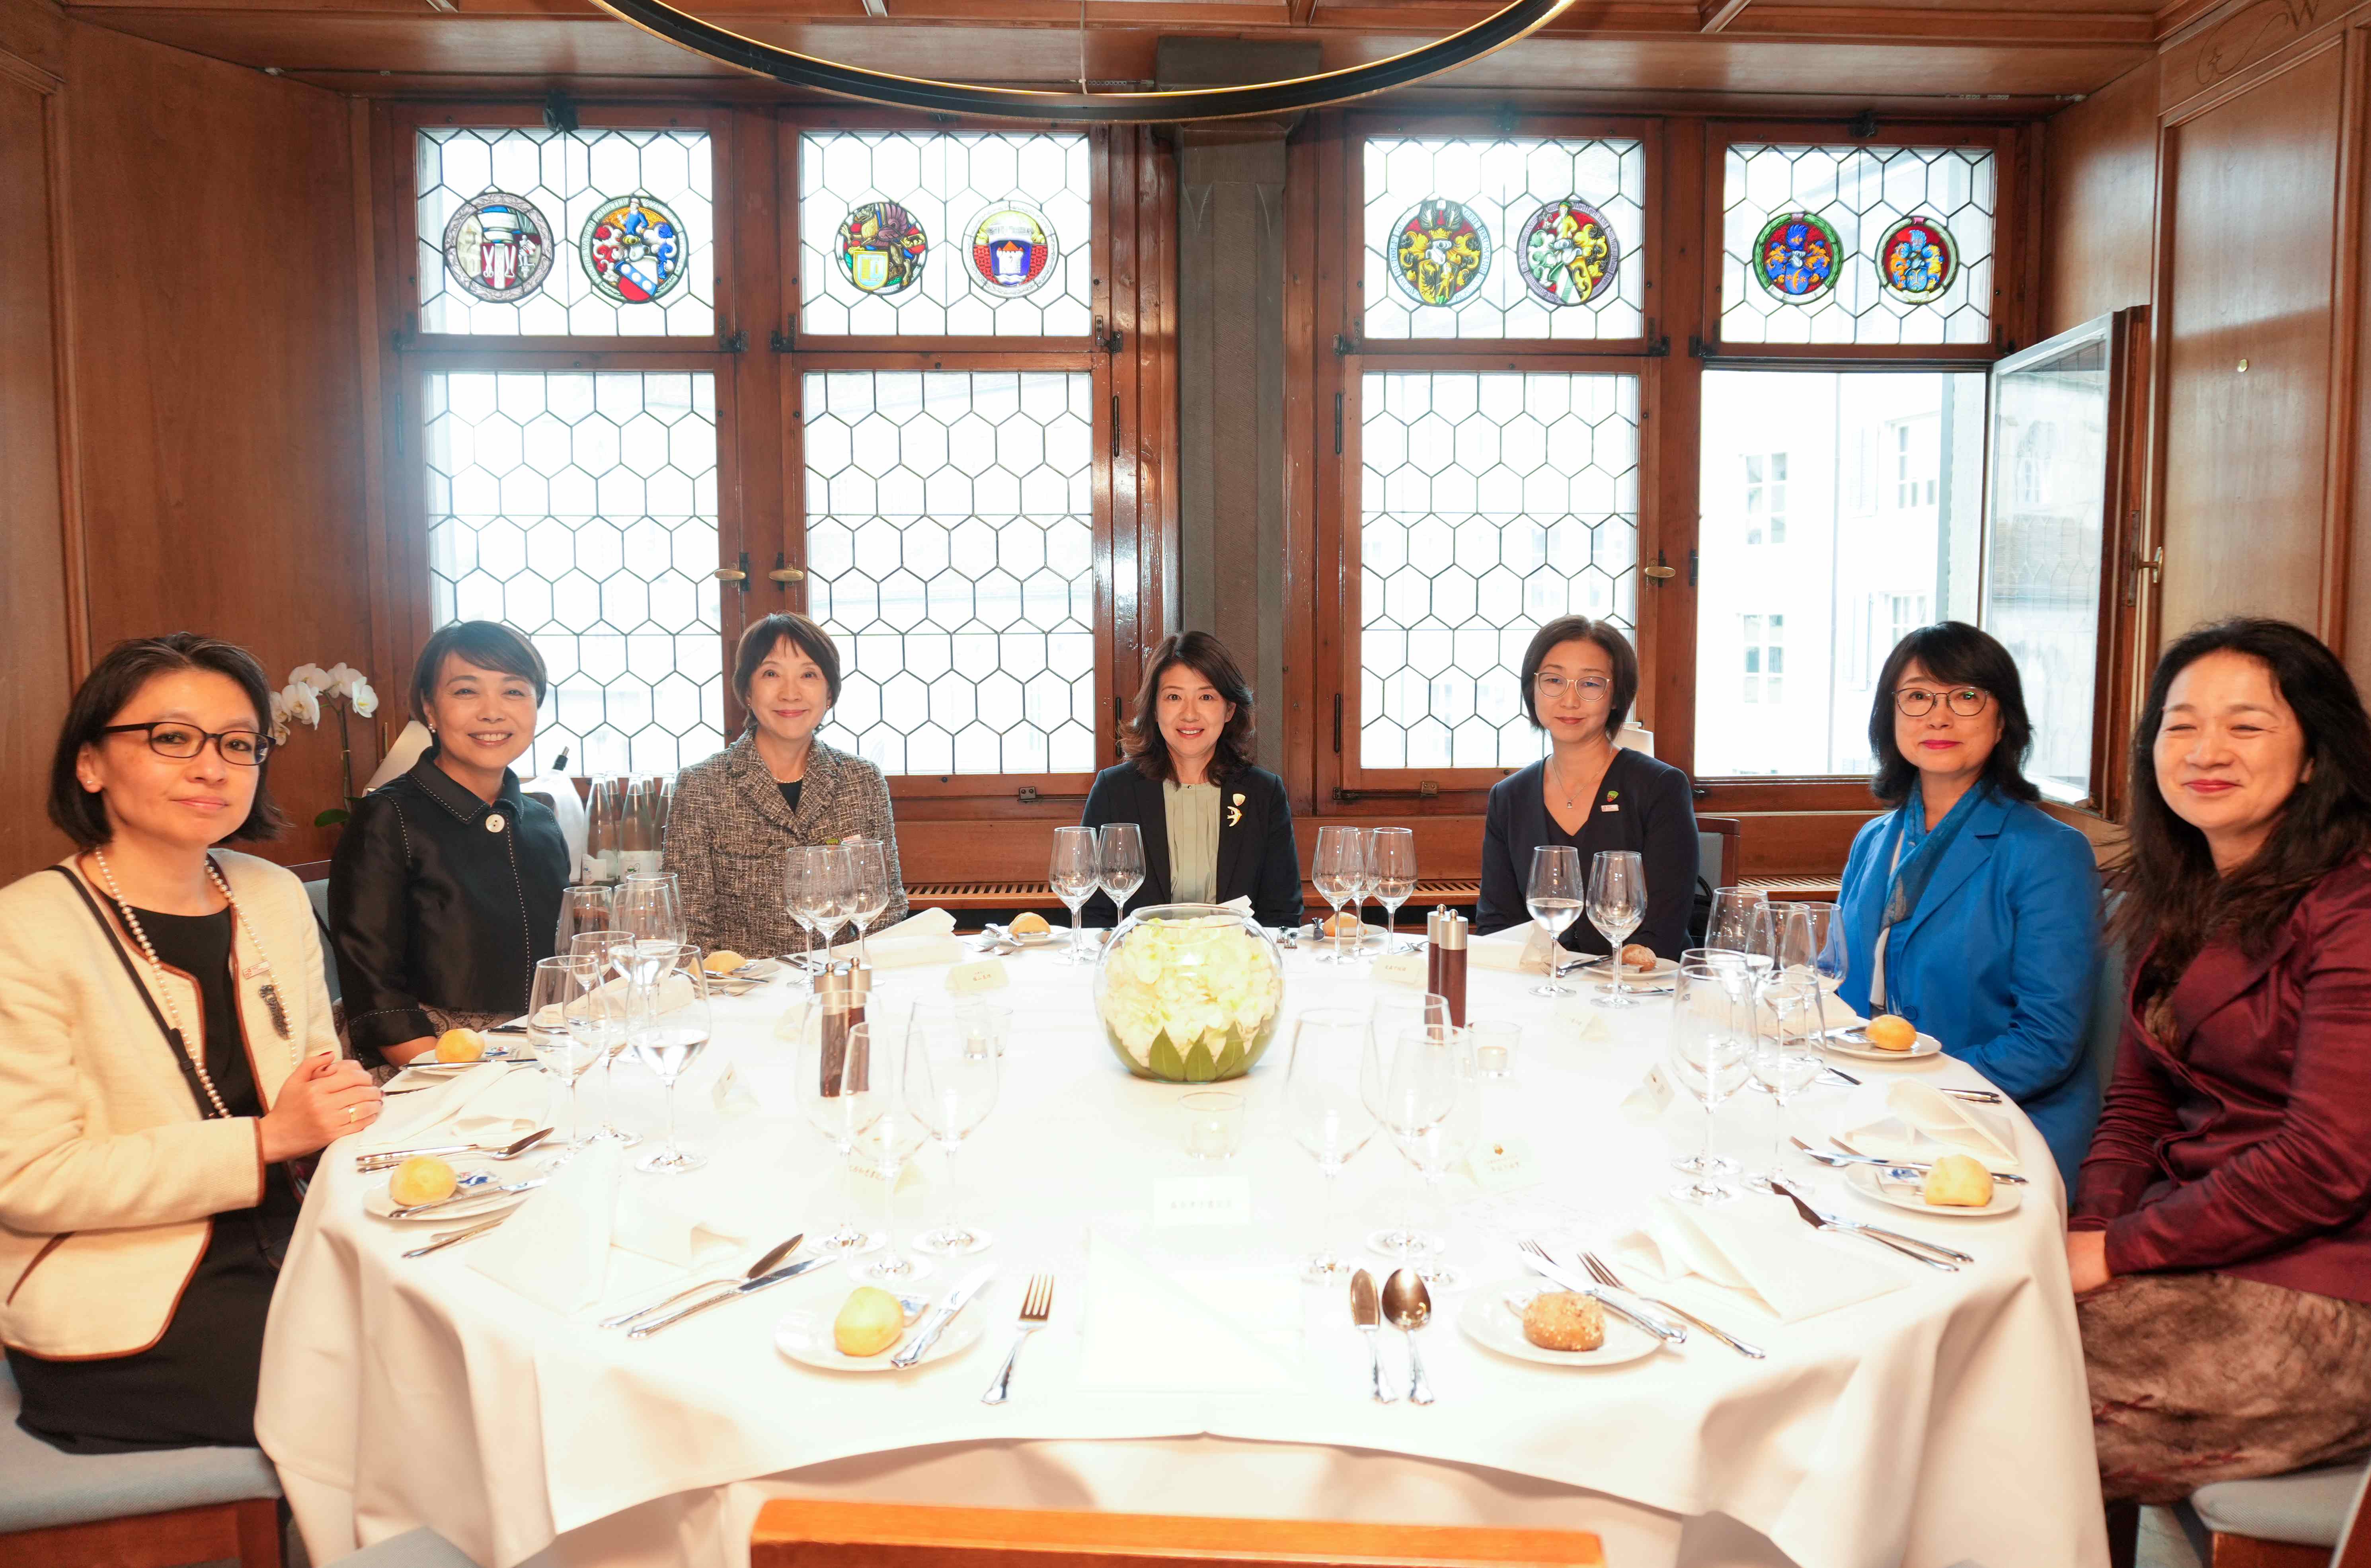 Dinner and discussion with Japanese women working in Switzerland